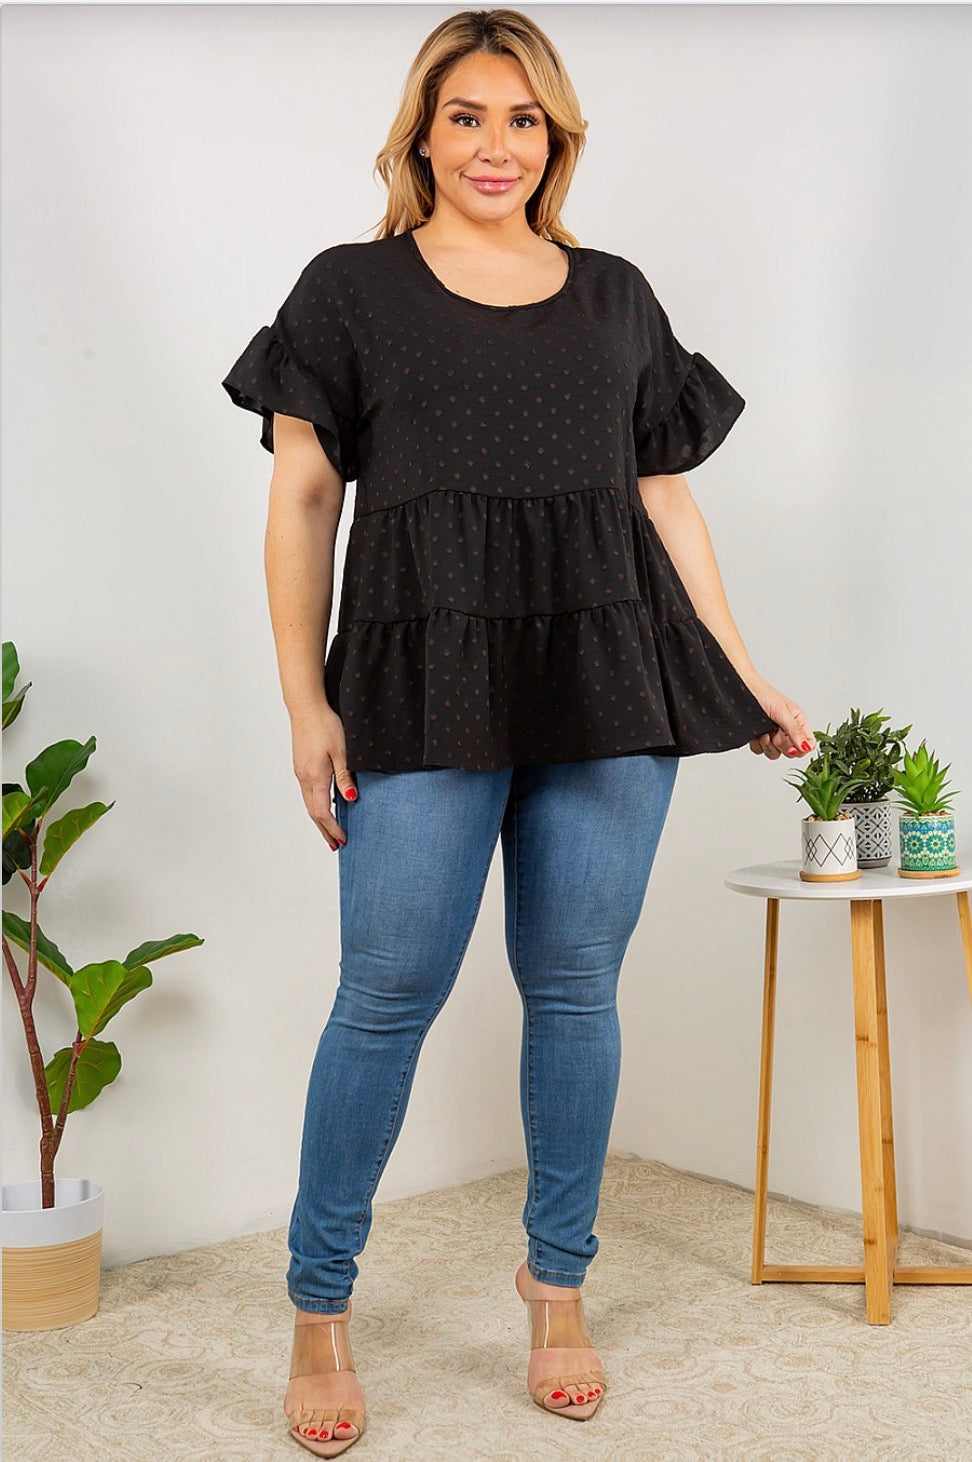 A woman wearing a Dot Ruffle Sleeve, Multi Tier Tunic Top from Spin USA and jeans.